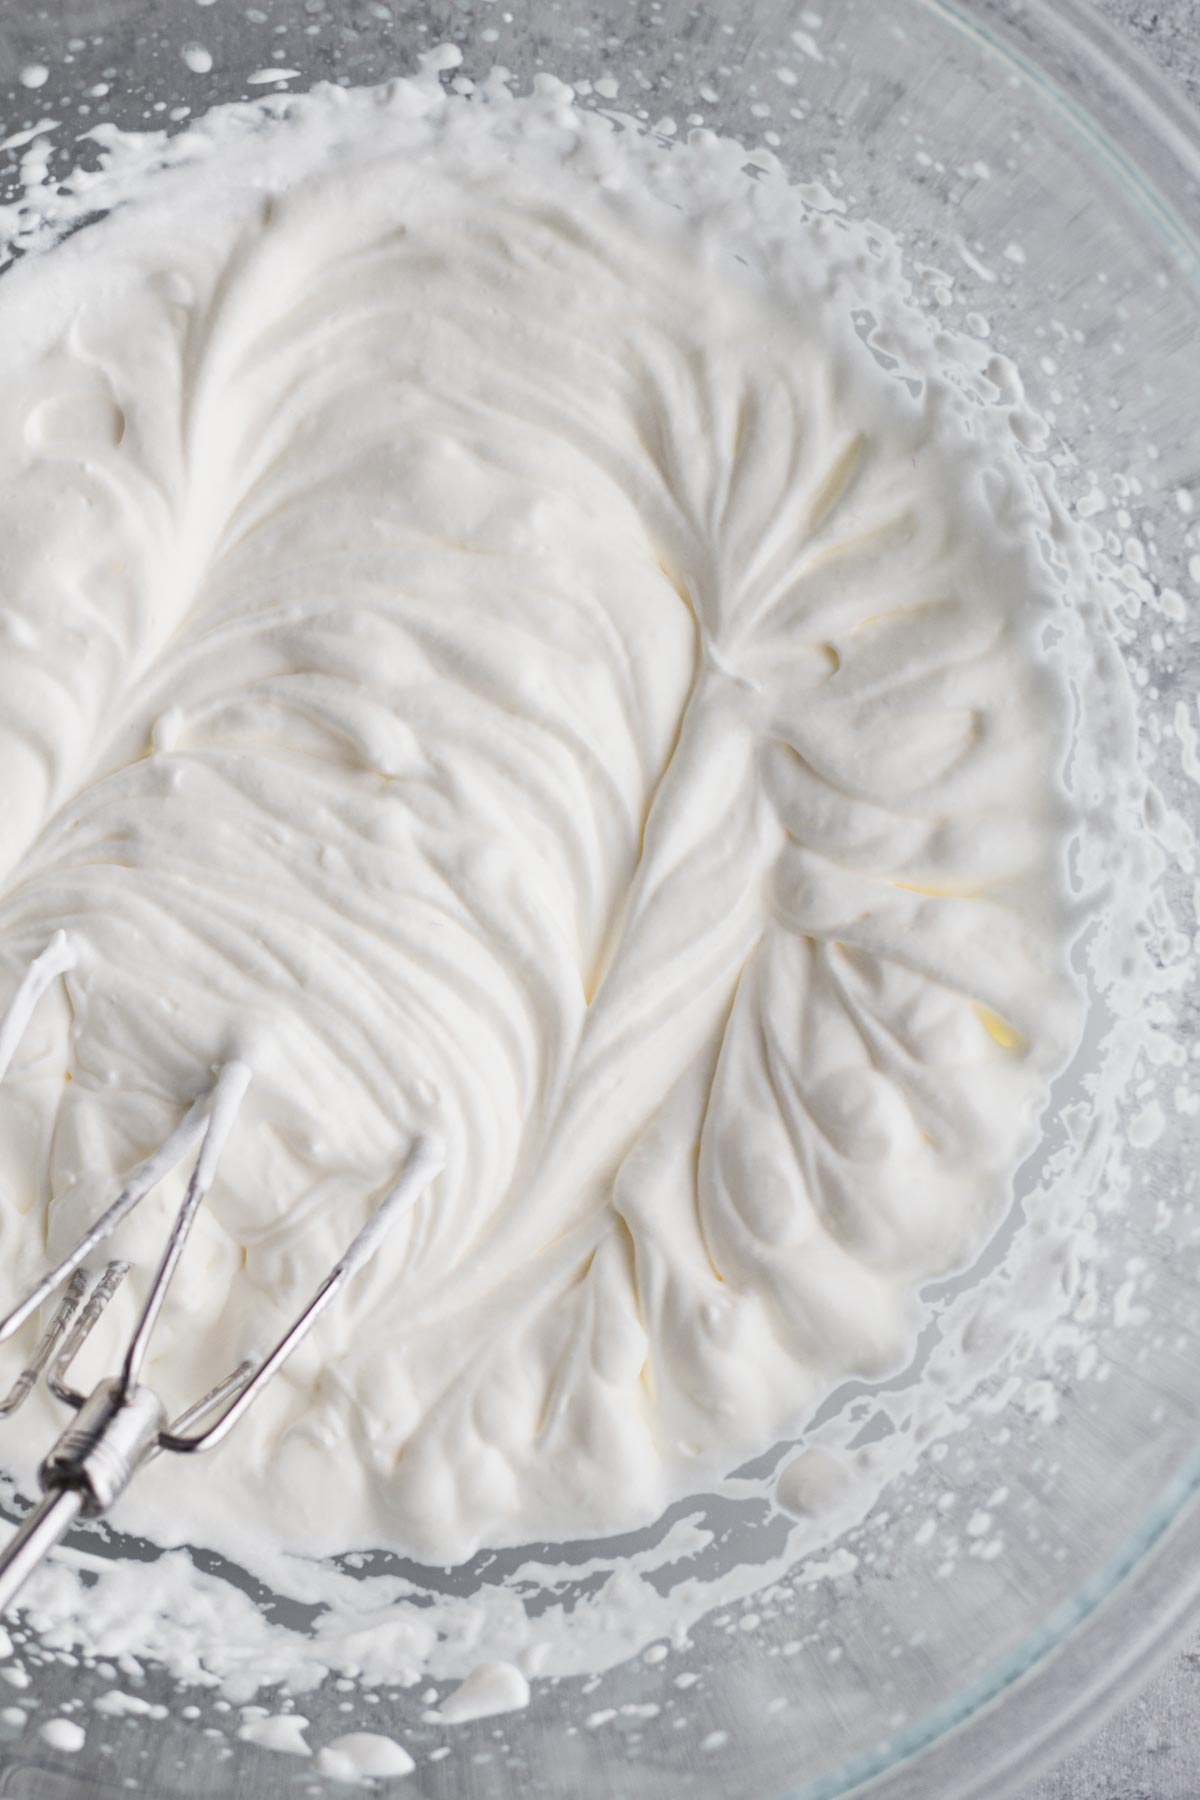 Swirls of whipped cream in a glass bowl on a gray surface.